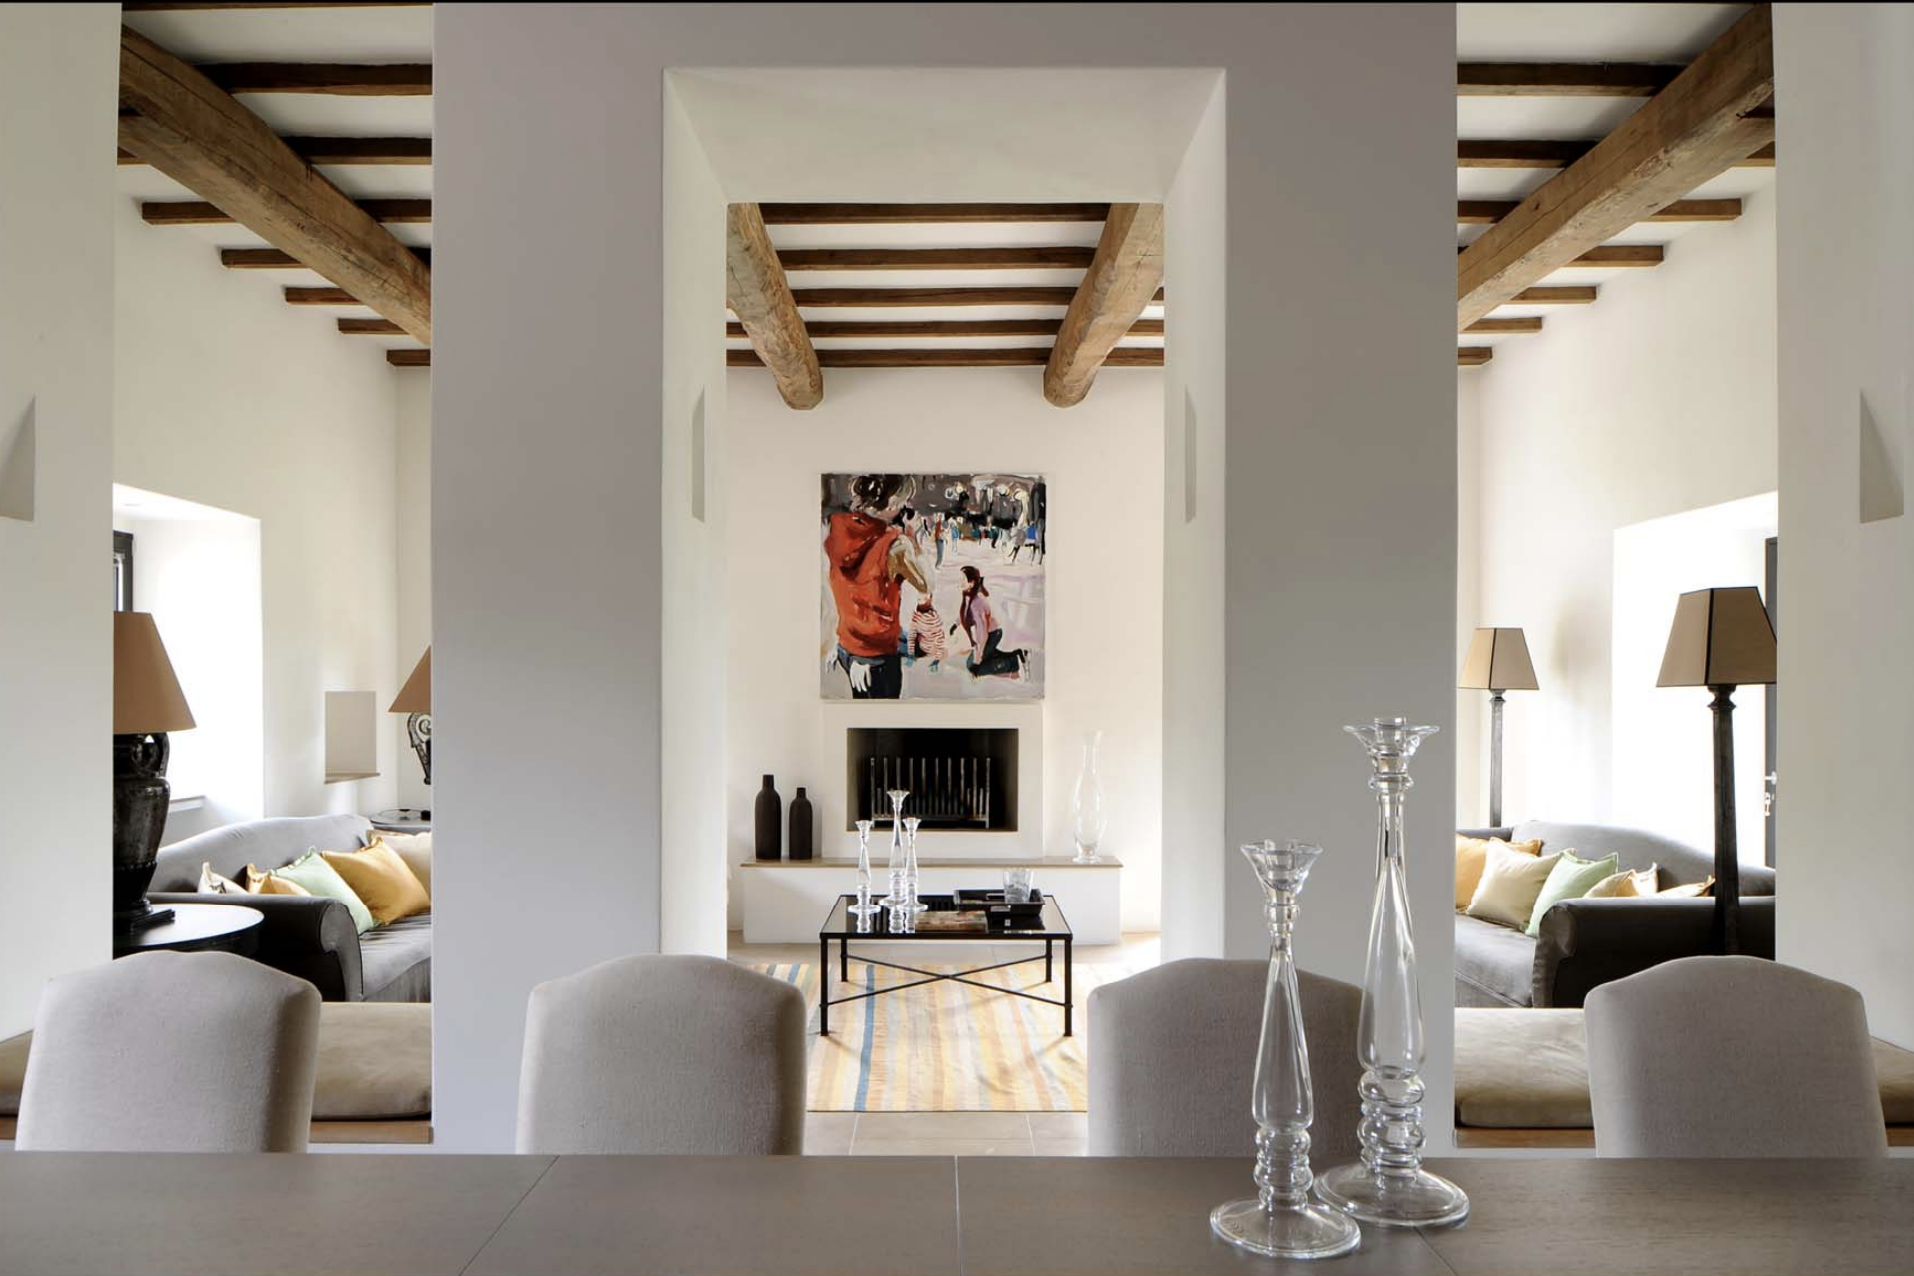 Francis+York+Villa Arrighi | Luxury Villa Rental on the Border of Umbria and Tuscany  00006.png